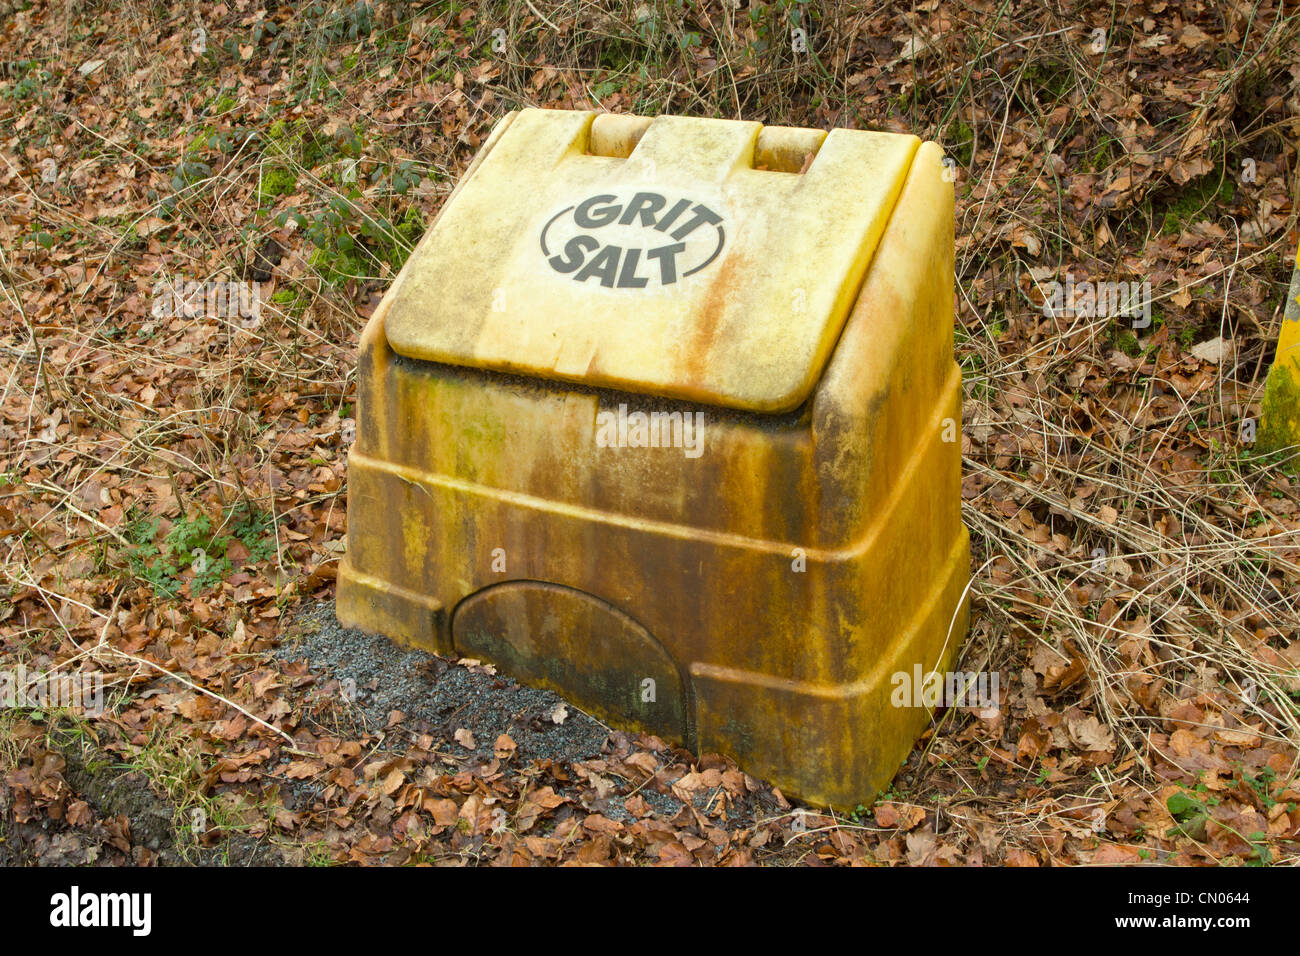 Yellow British grit salt roadside container for gritting in the winter. Stock Photo